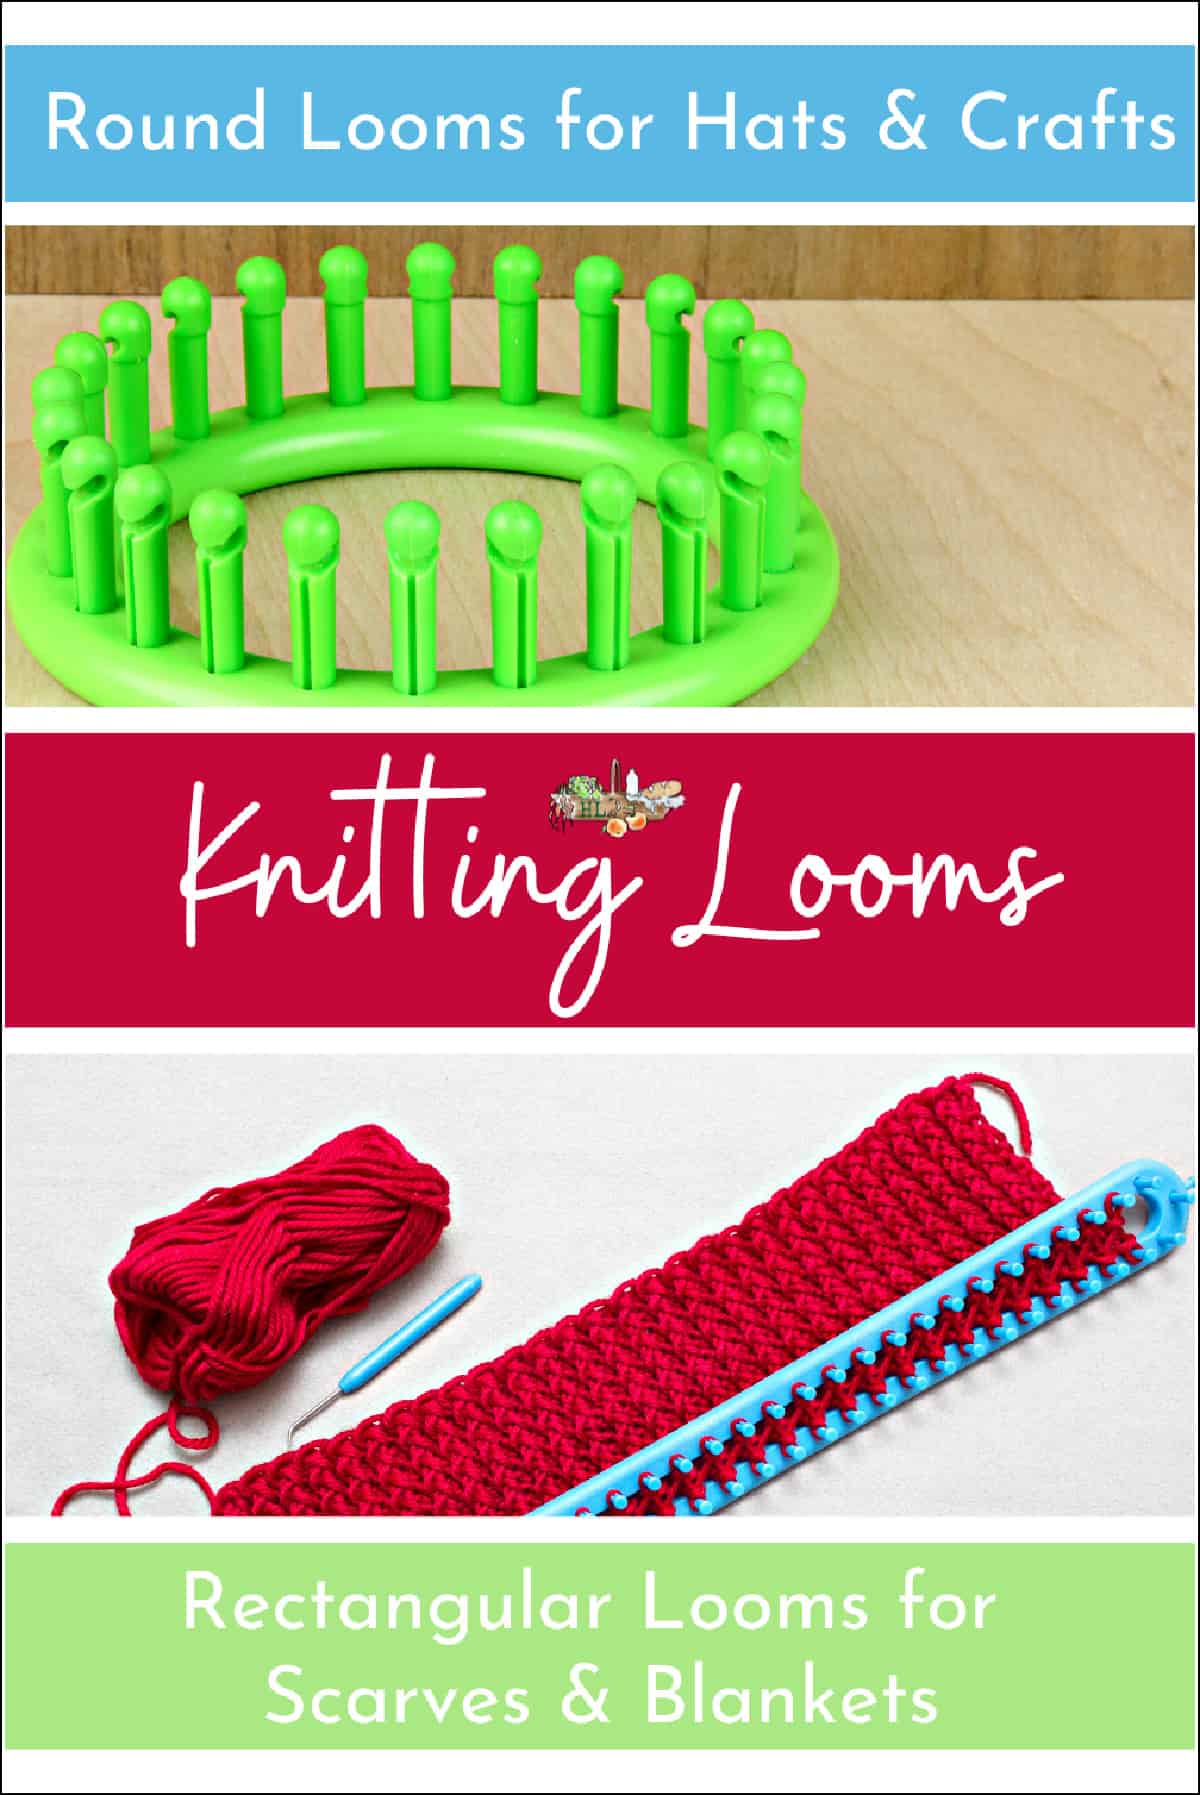 What is a Knitting Loom?